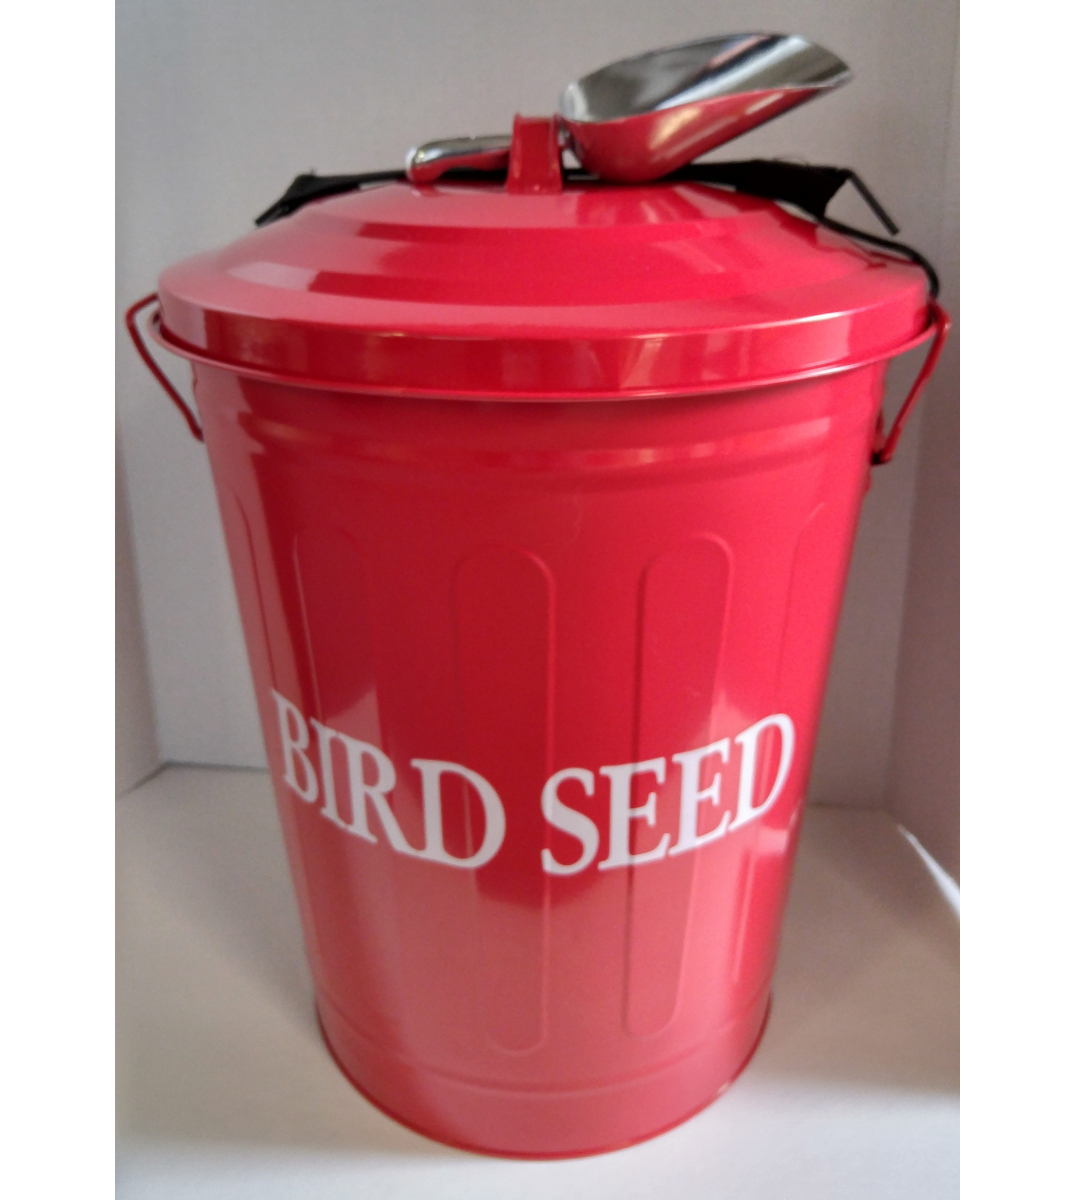 https://www.fiddlecreekfarms.com/store/ProdImages/ProdImages_Extra/15218_HBT-001RS-Metal-Seed-Container-in-RED-1-1-e1523560210826-1-1.jpg